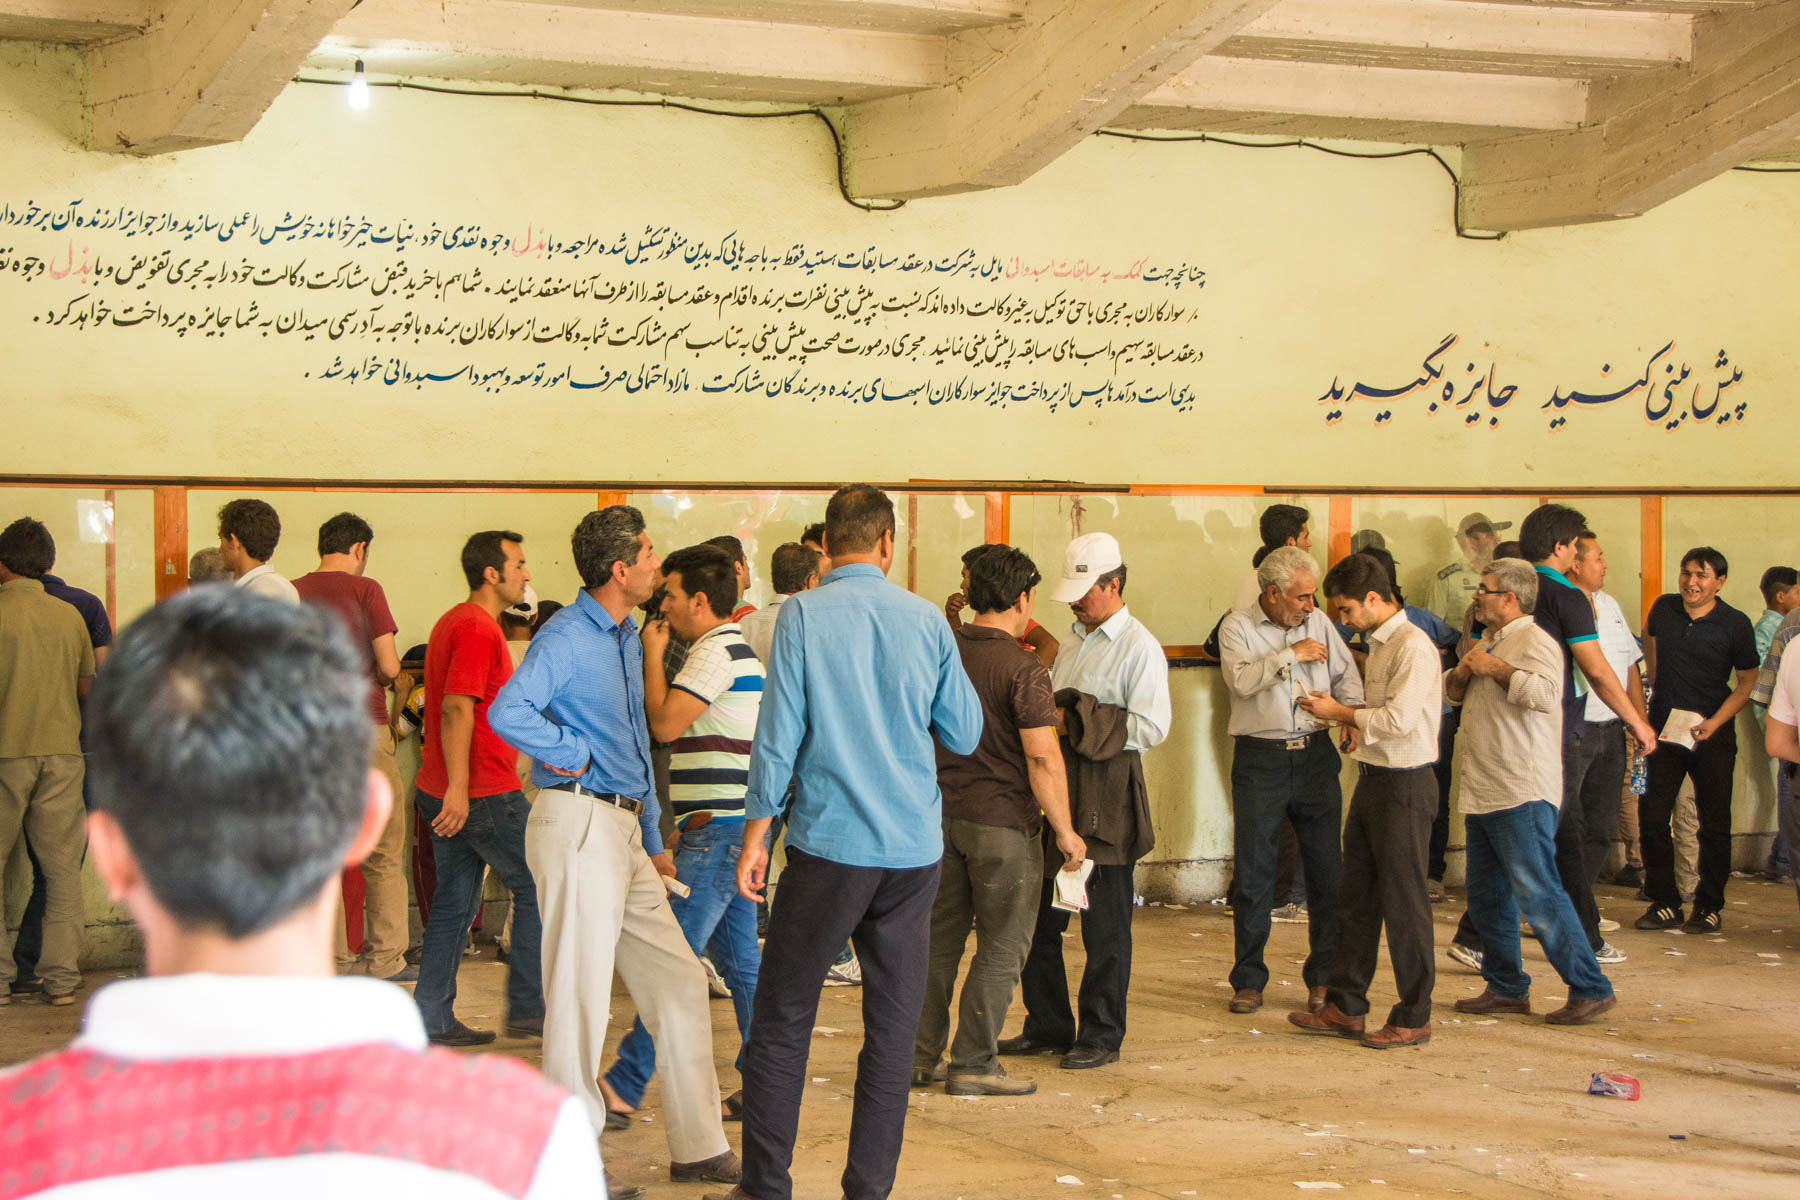 People placing bets at the horse races in Gonbad-e Kavus, Iran.